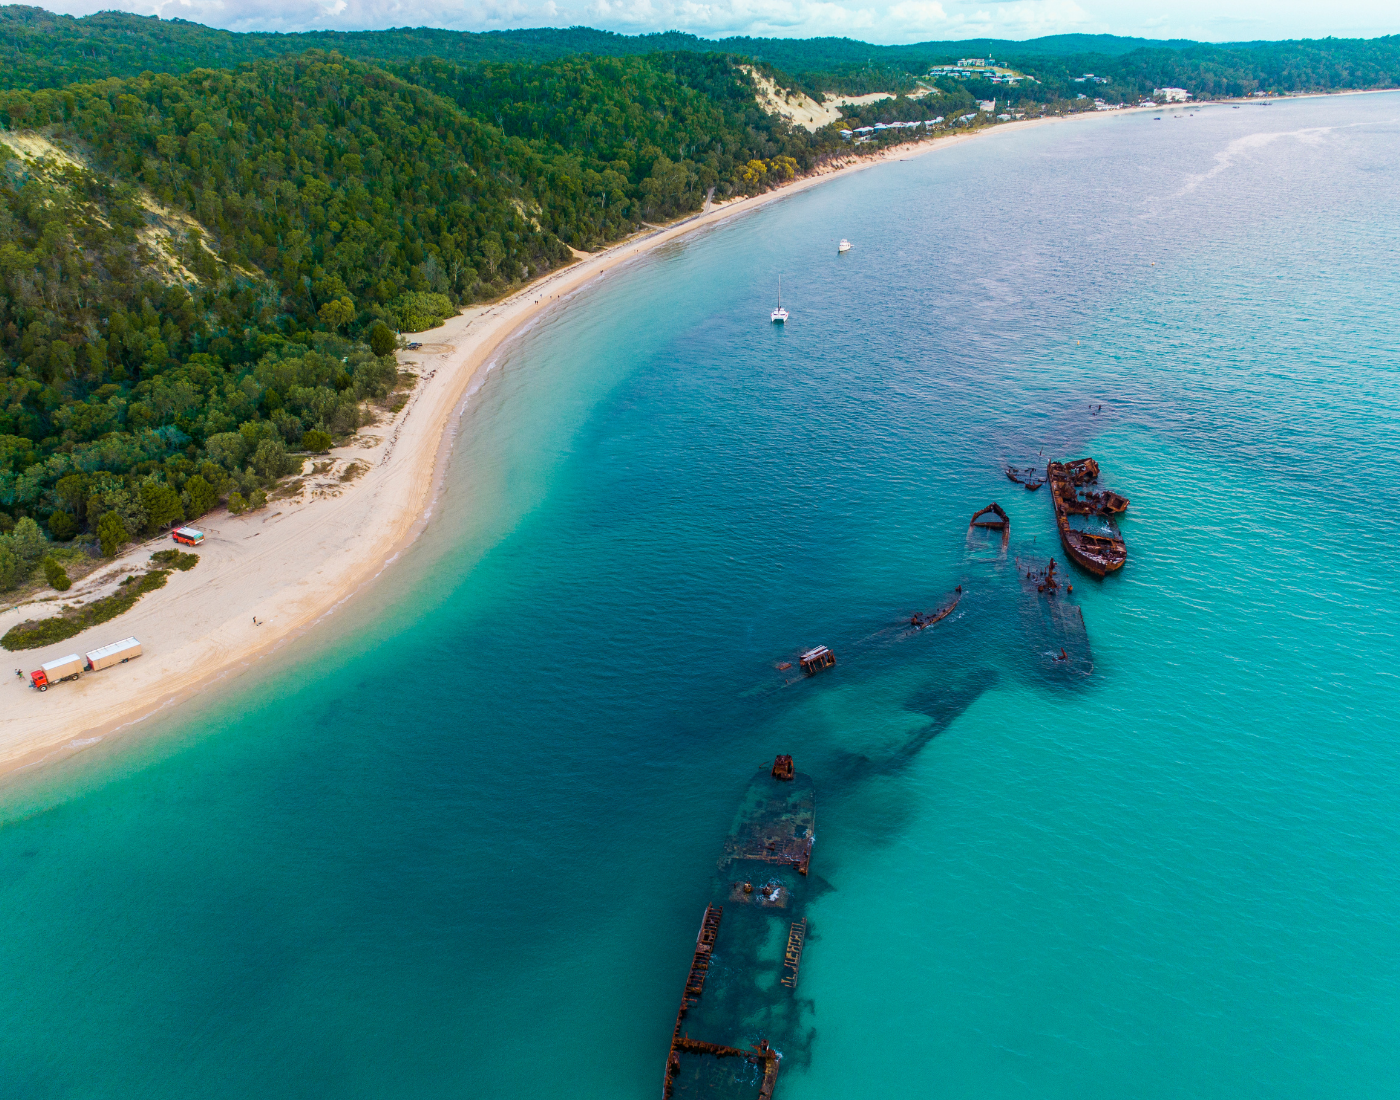 Tour 11 - Tangalooma Shipwrecks Scenic VIP Helicopter Experience